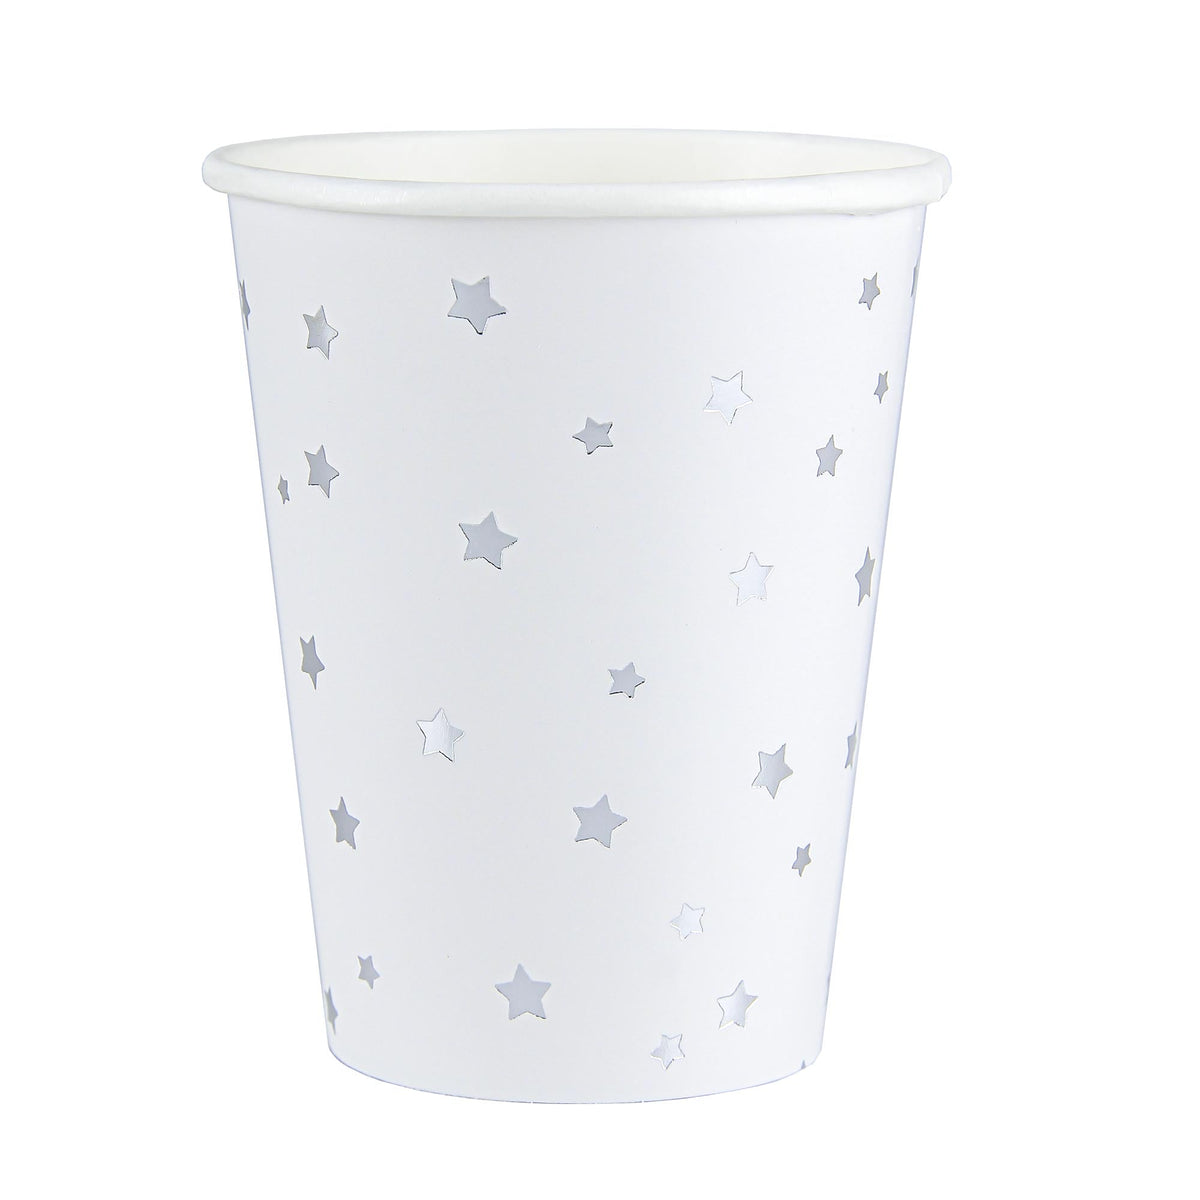 YIWU SANDY PAPER PRODUCTS CO., LTD Everyday Entertaining Little Stars Paper Cups, Silver, 9 oz, 8 Count 810120713083